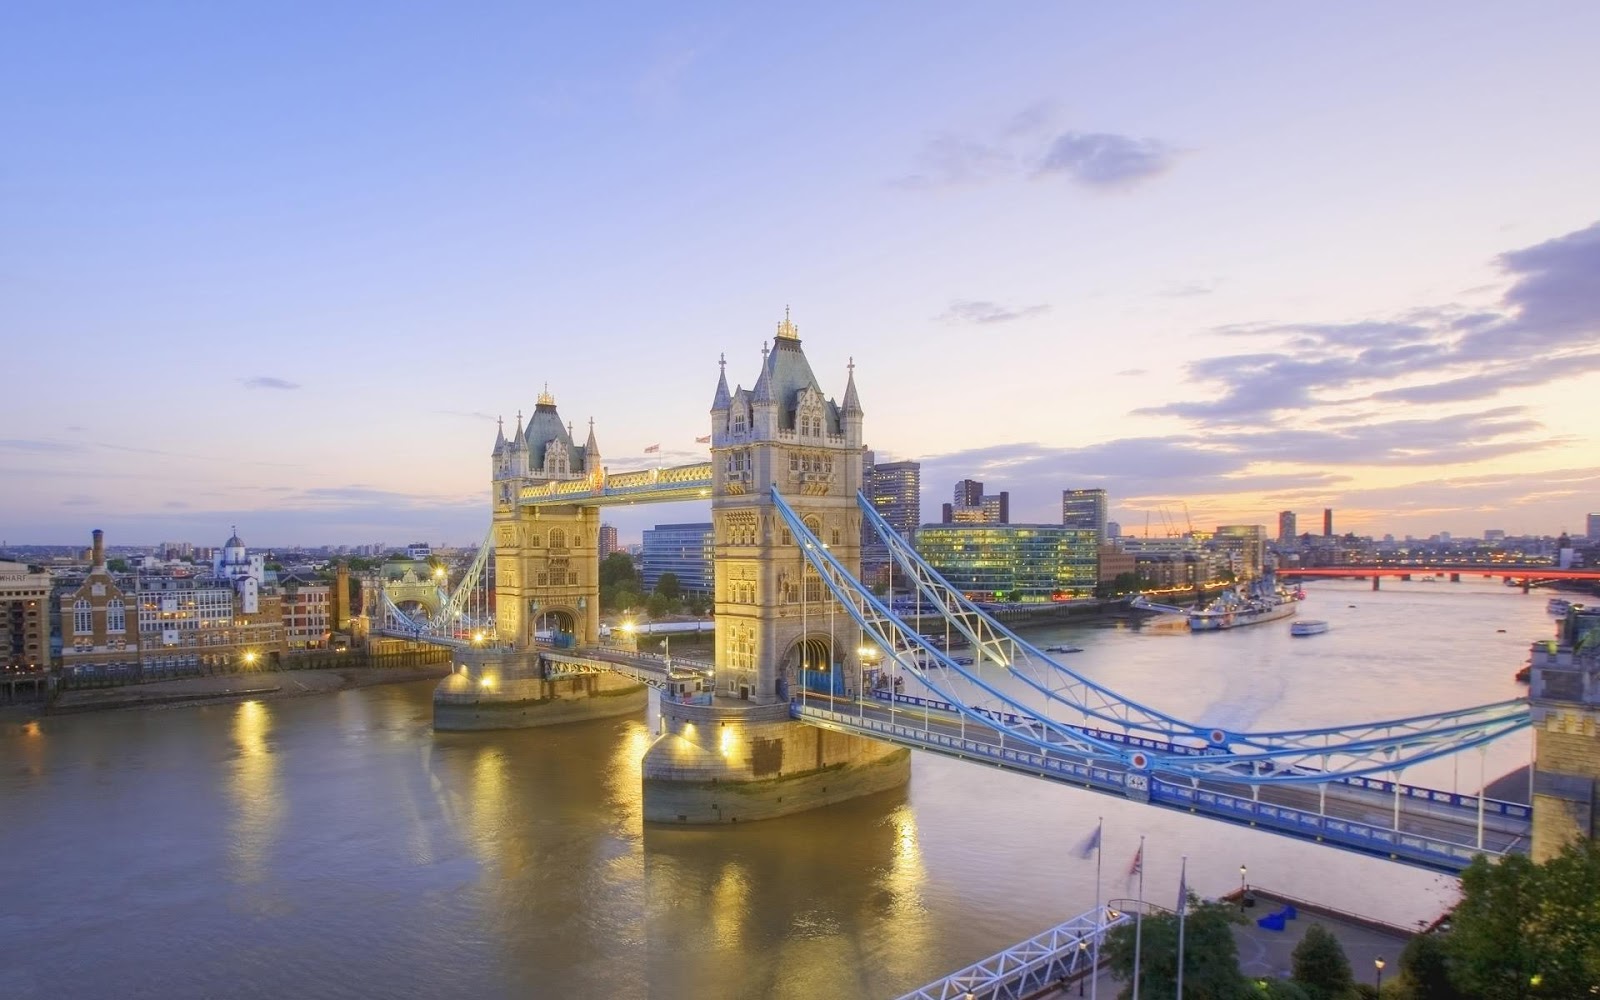 travel guide: London Trip - Places To Visit In London? - Travel Advice